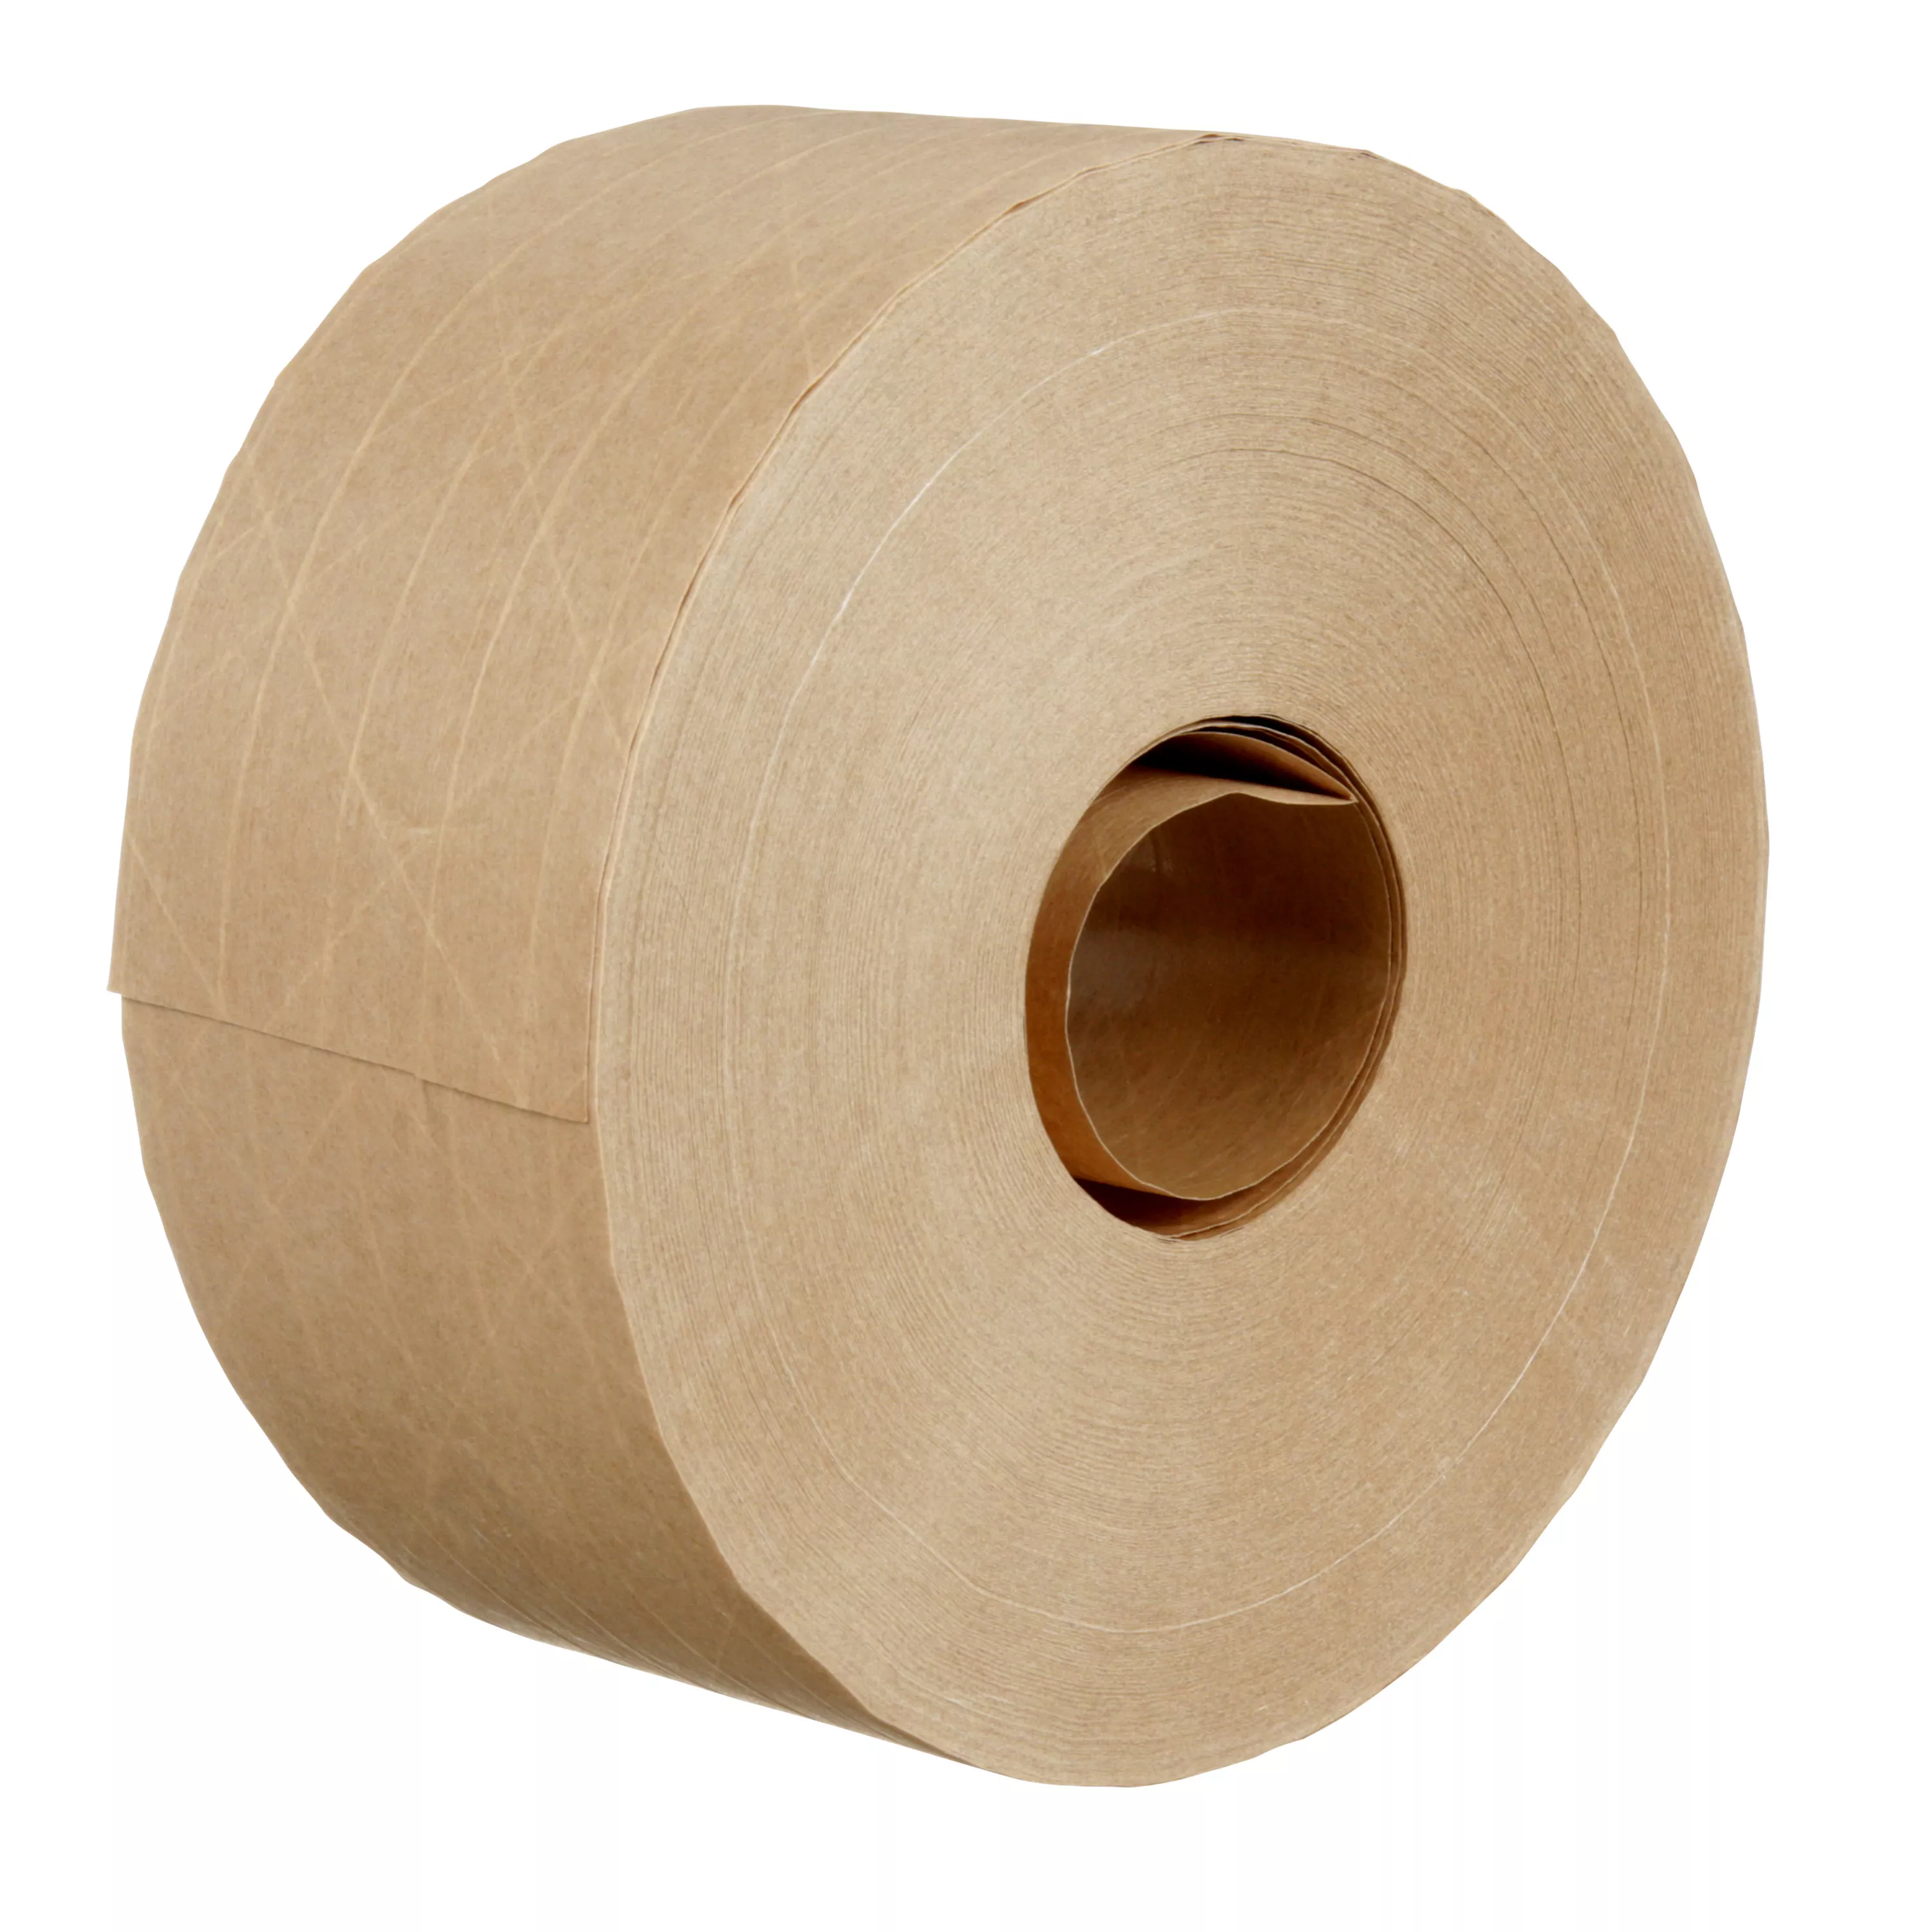 3M™ Water Activated Paper Tape 6144, Natural, Economy Reinforced, 70 mm x 450 ft, 10/Case